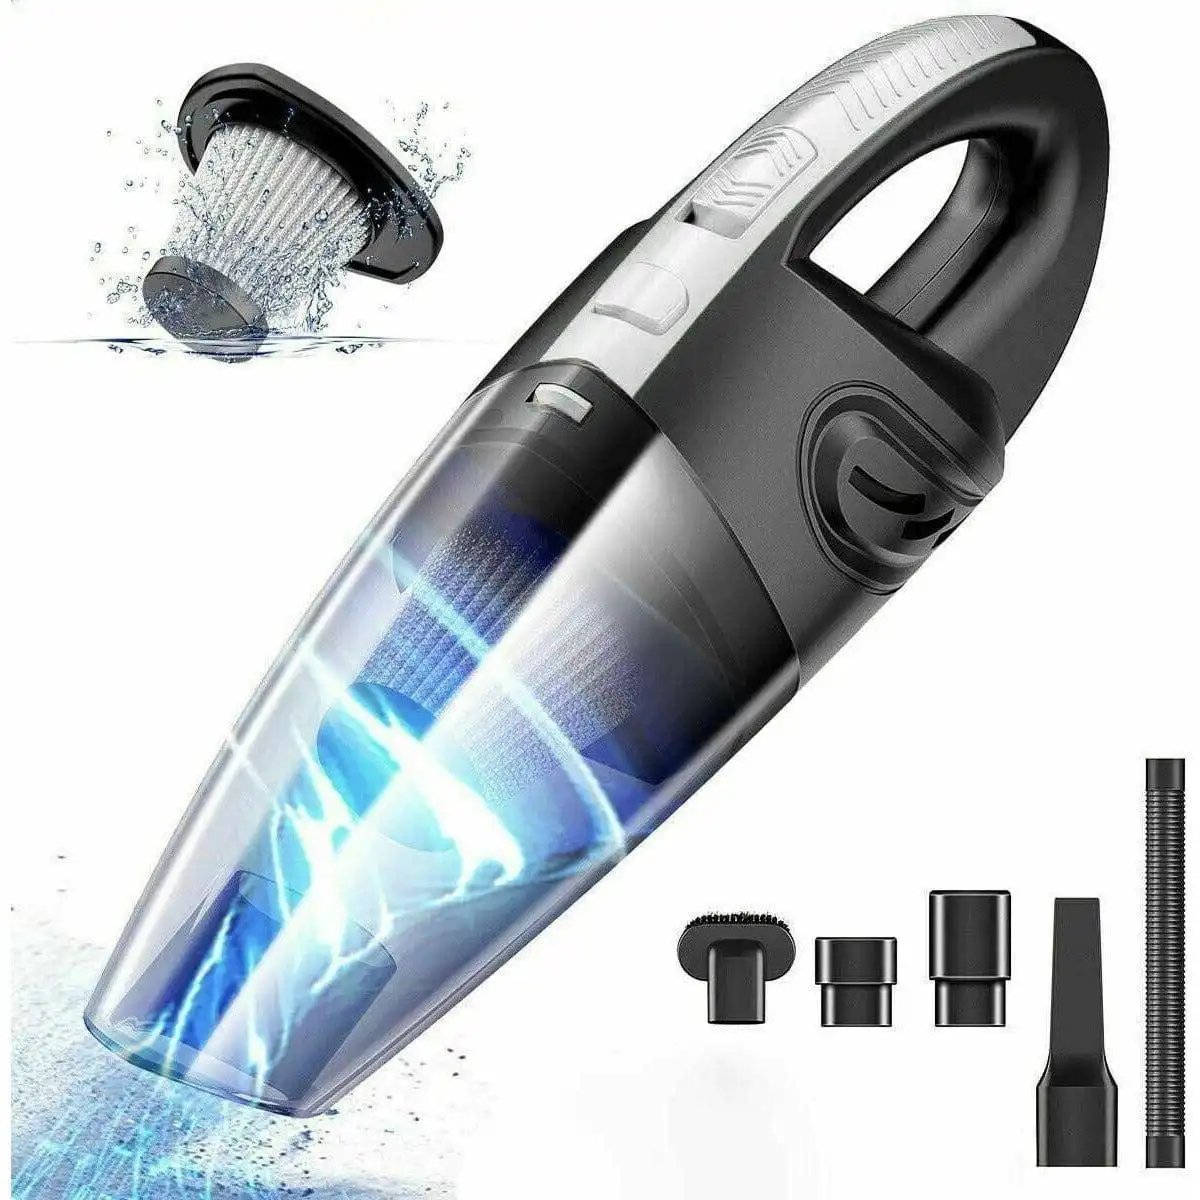 Cordless Car Vacuum Cleaner Handheld 12V 120W Cordless Rechargeable Portable Home